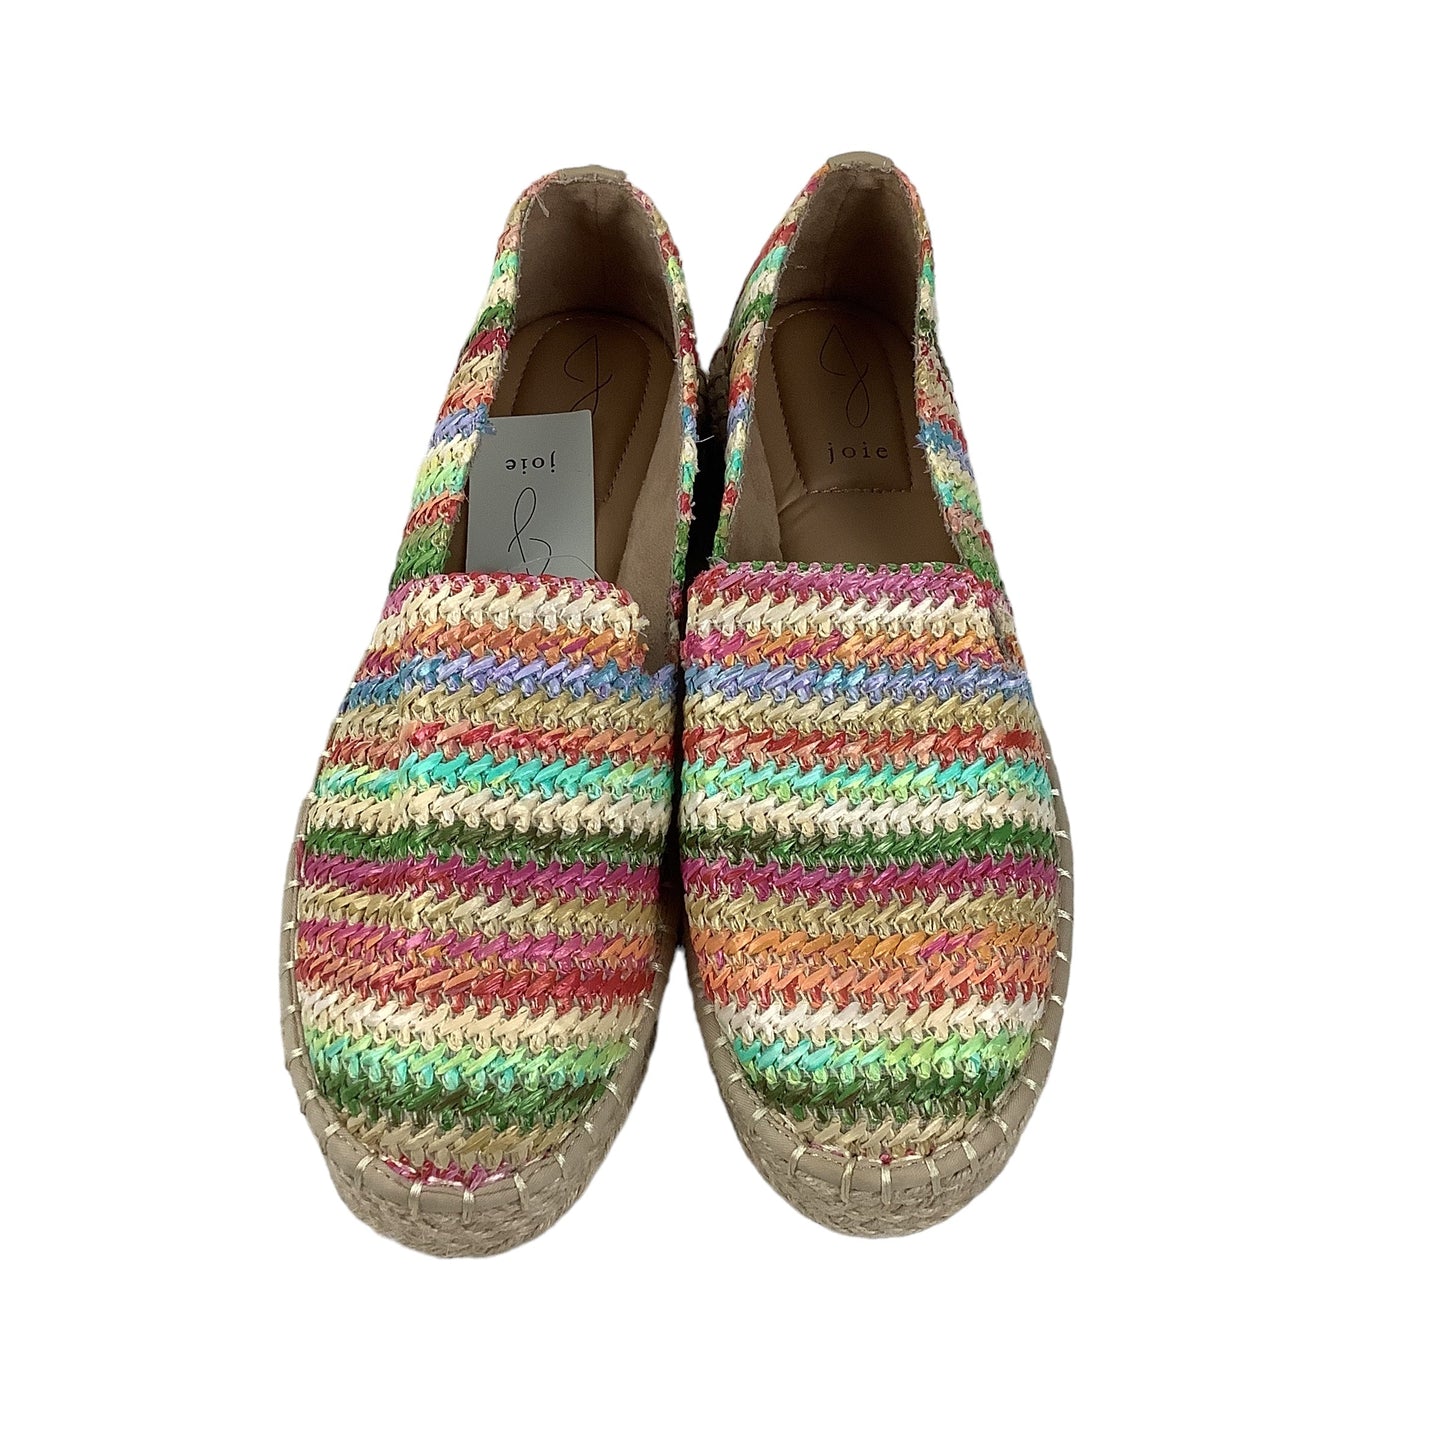 Multi-colored Shoes Flats Joie, Size 7.5